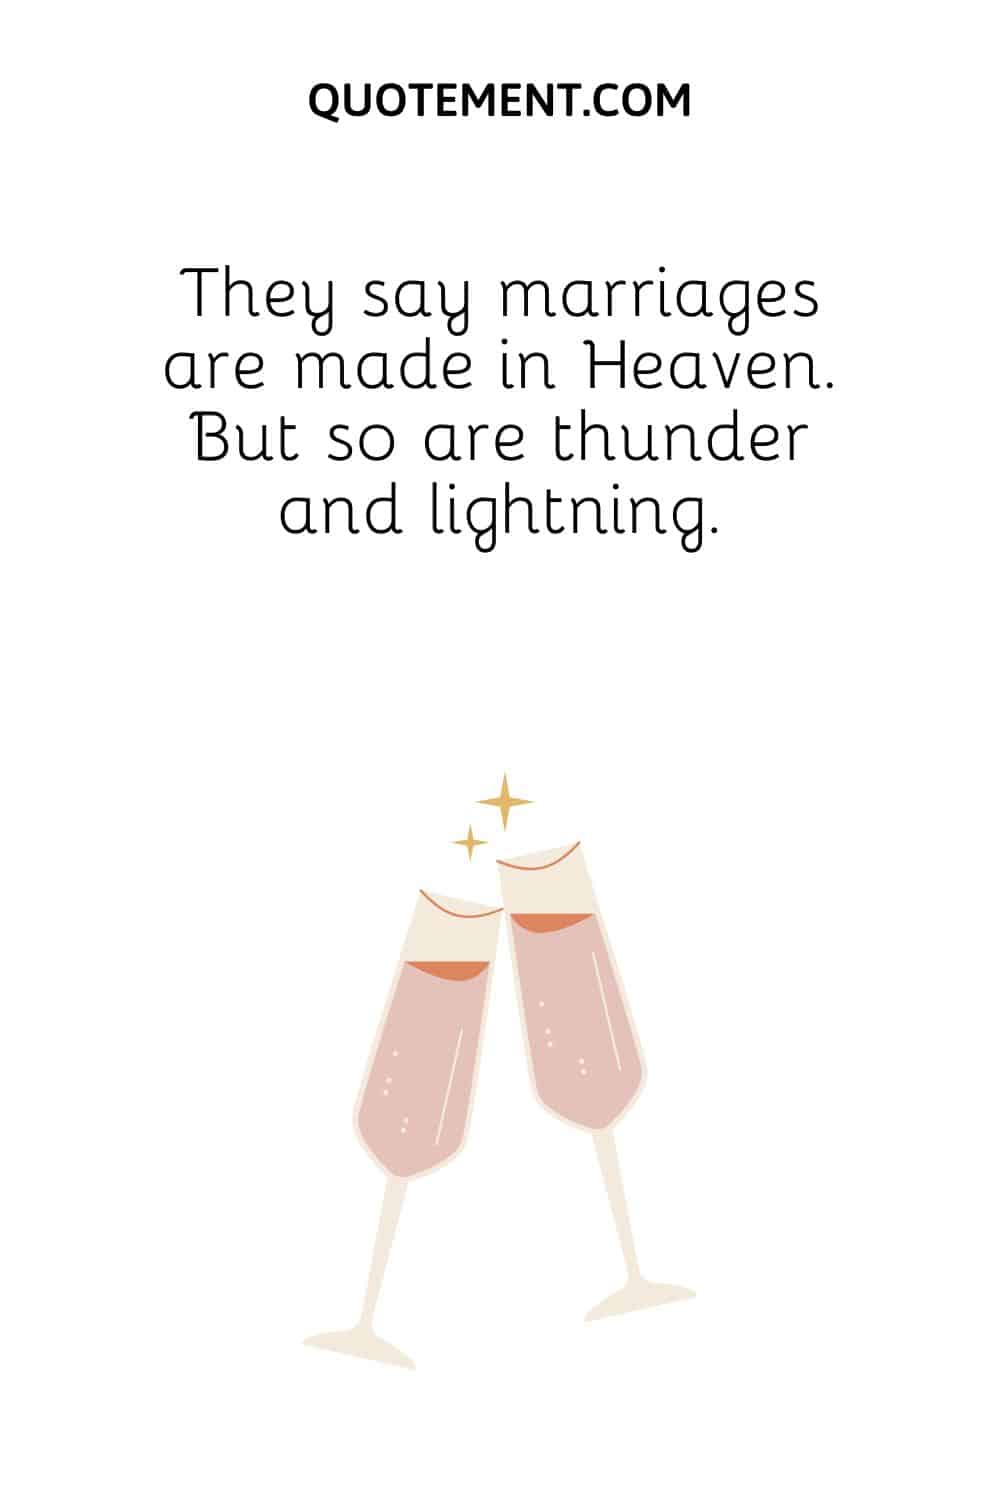 They say marriages are made in Heaven. But so are thunder and lightning.